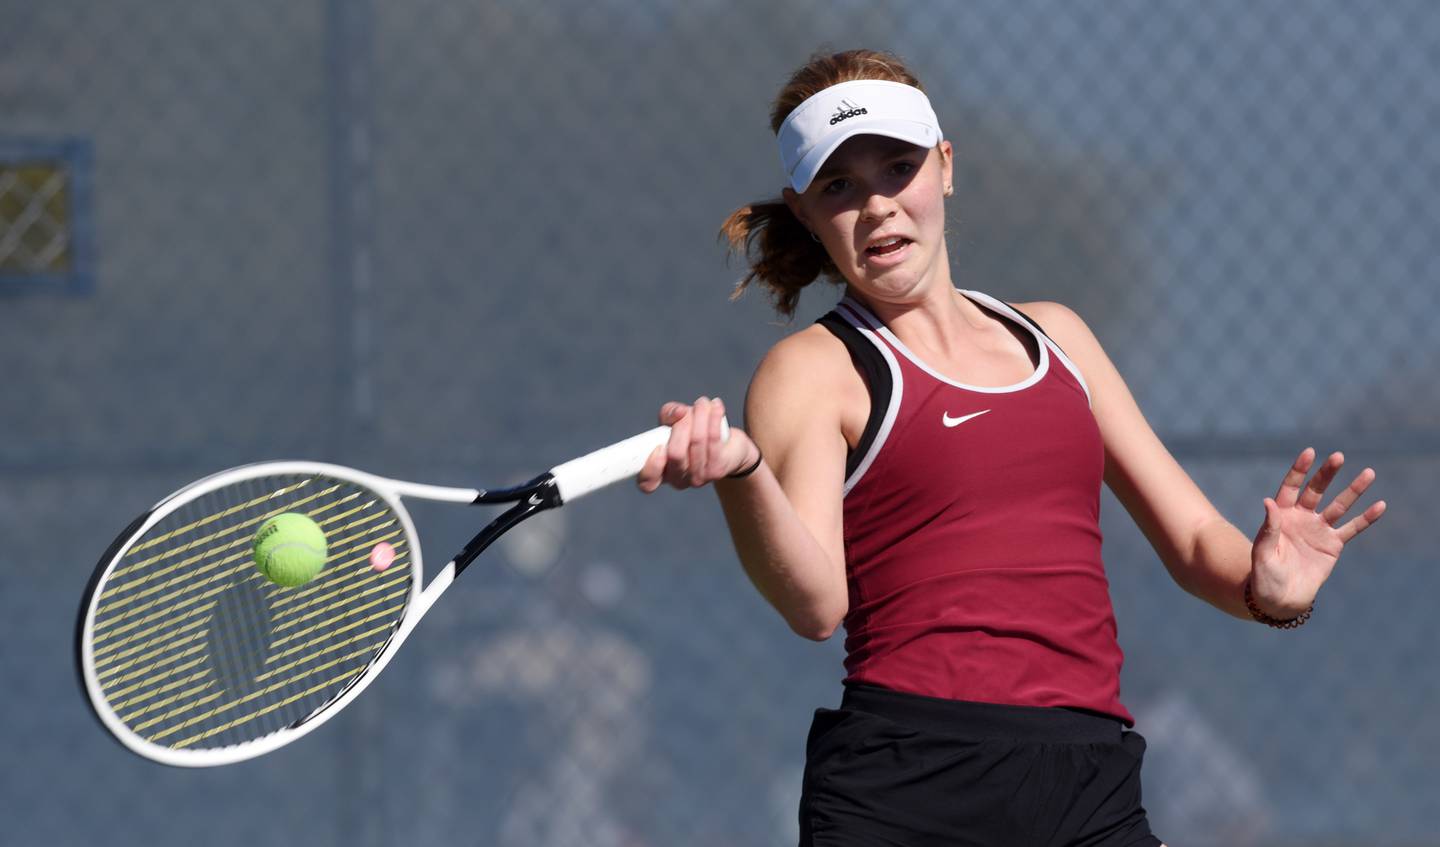 Plainfield North’s Jessica Kovalcik competes in the Class 2A singles championship match during girls state tennis meet in Buffalo Grove Saturday.